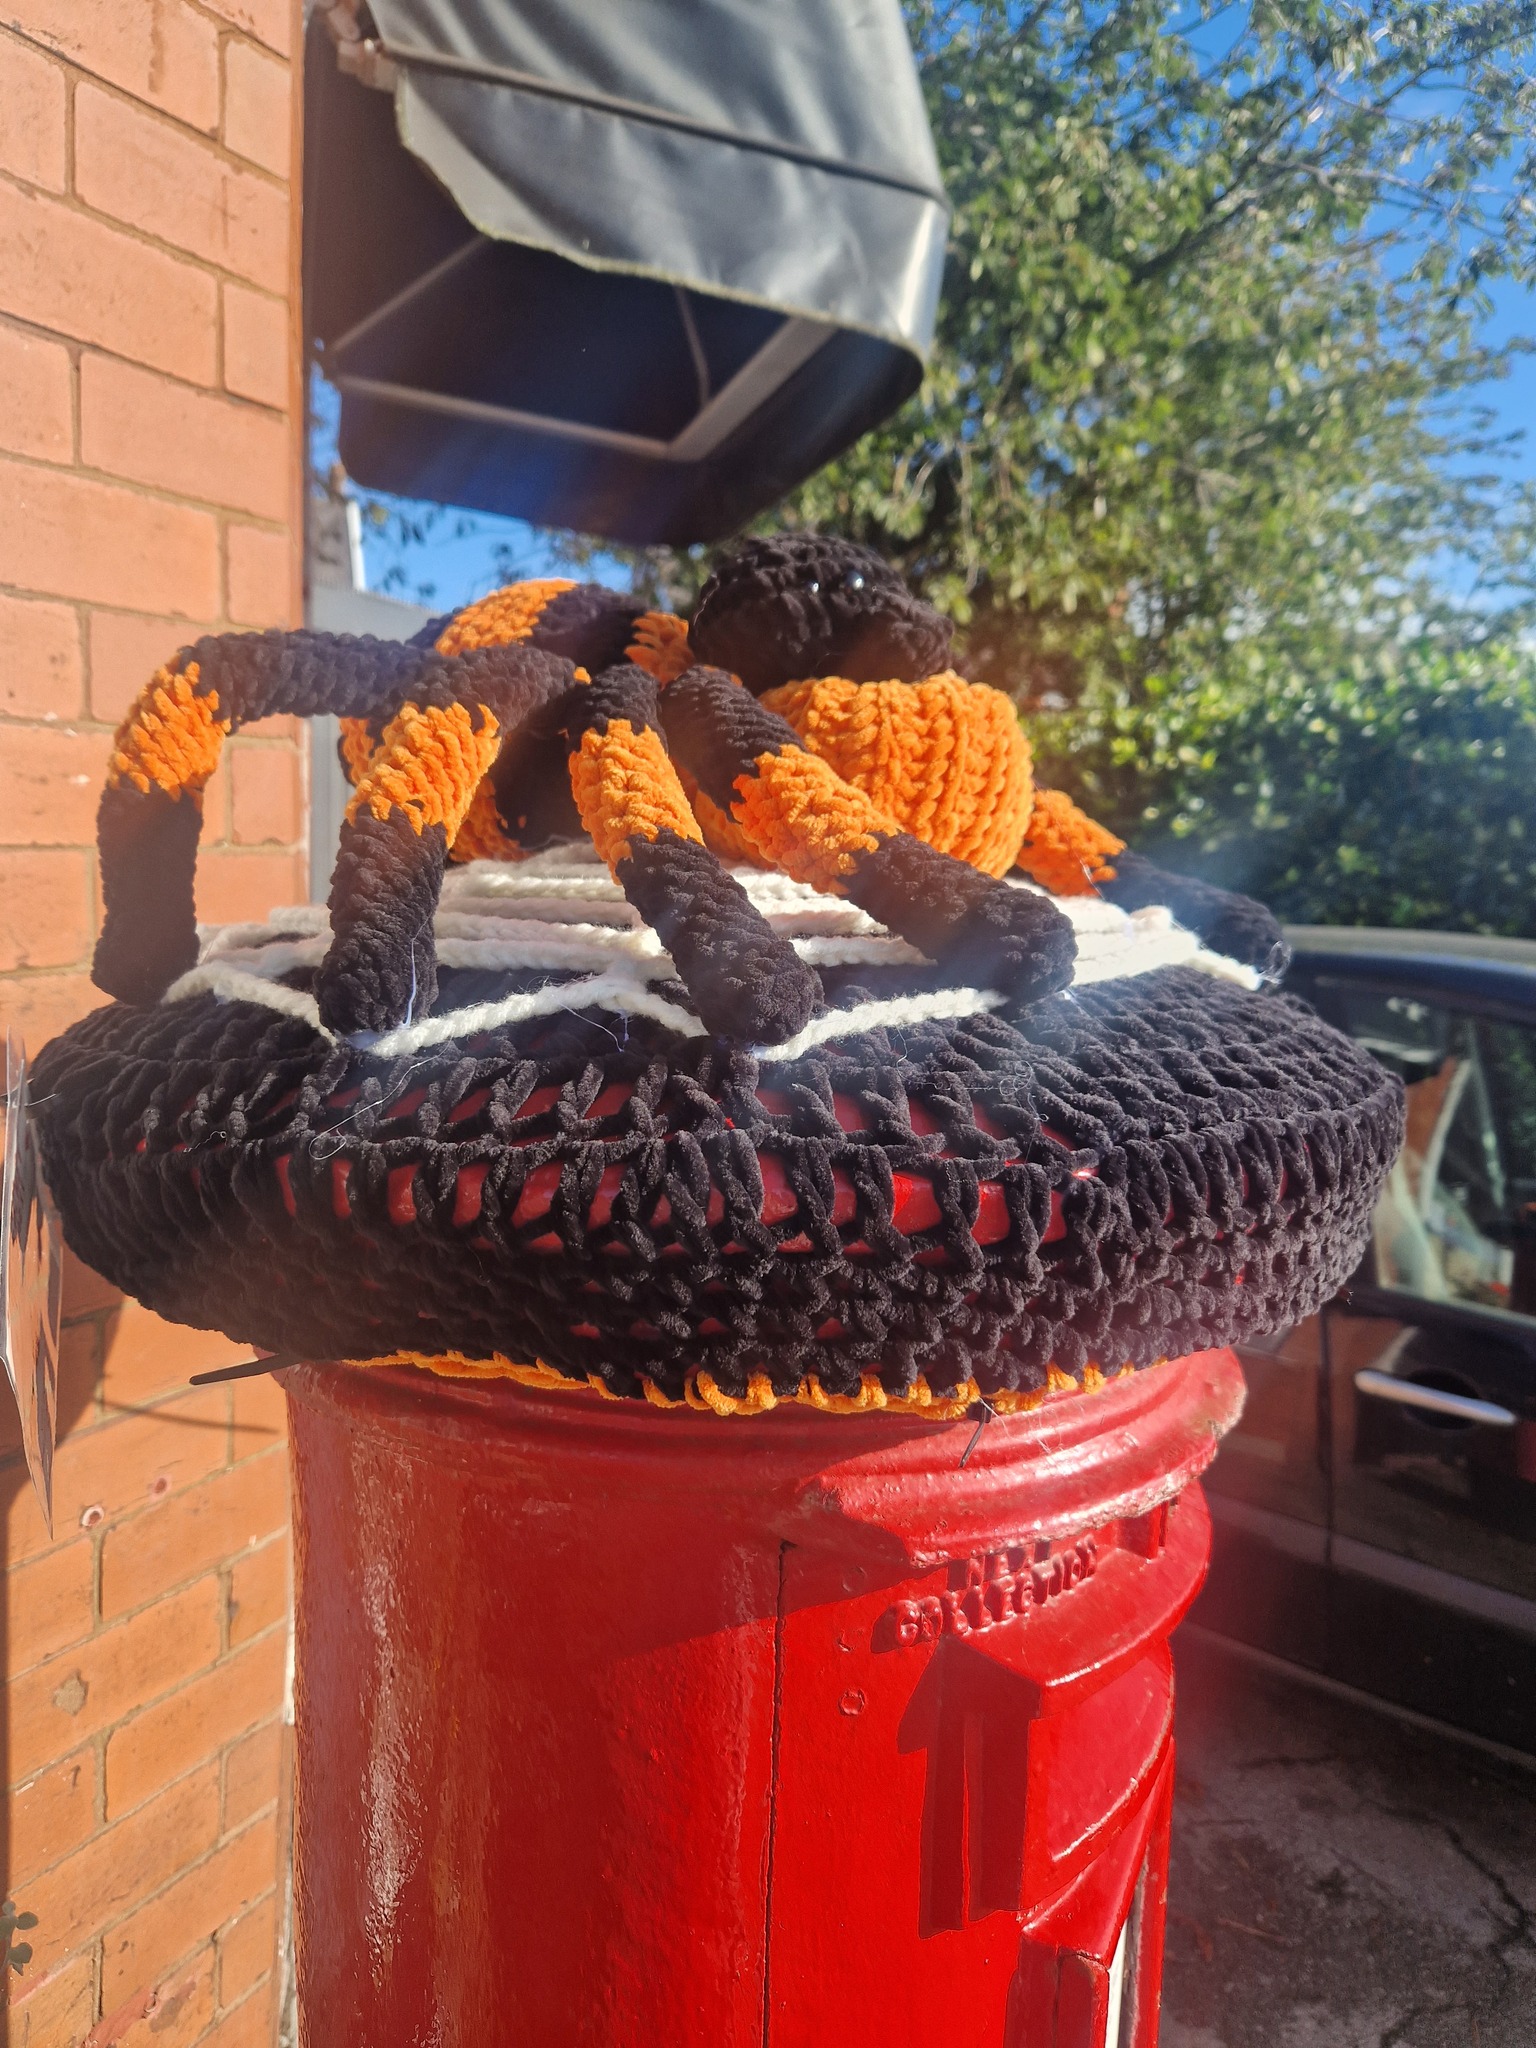 Yarn bombing work by the Southport Hookers crochet group